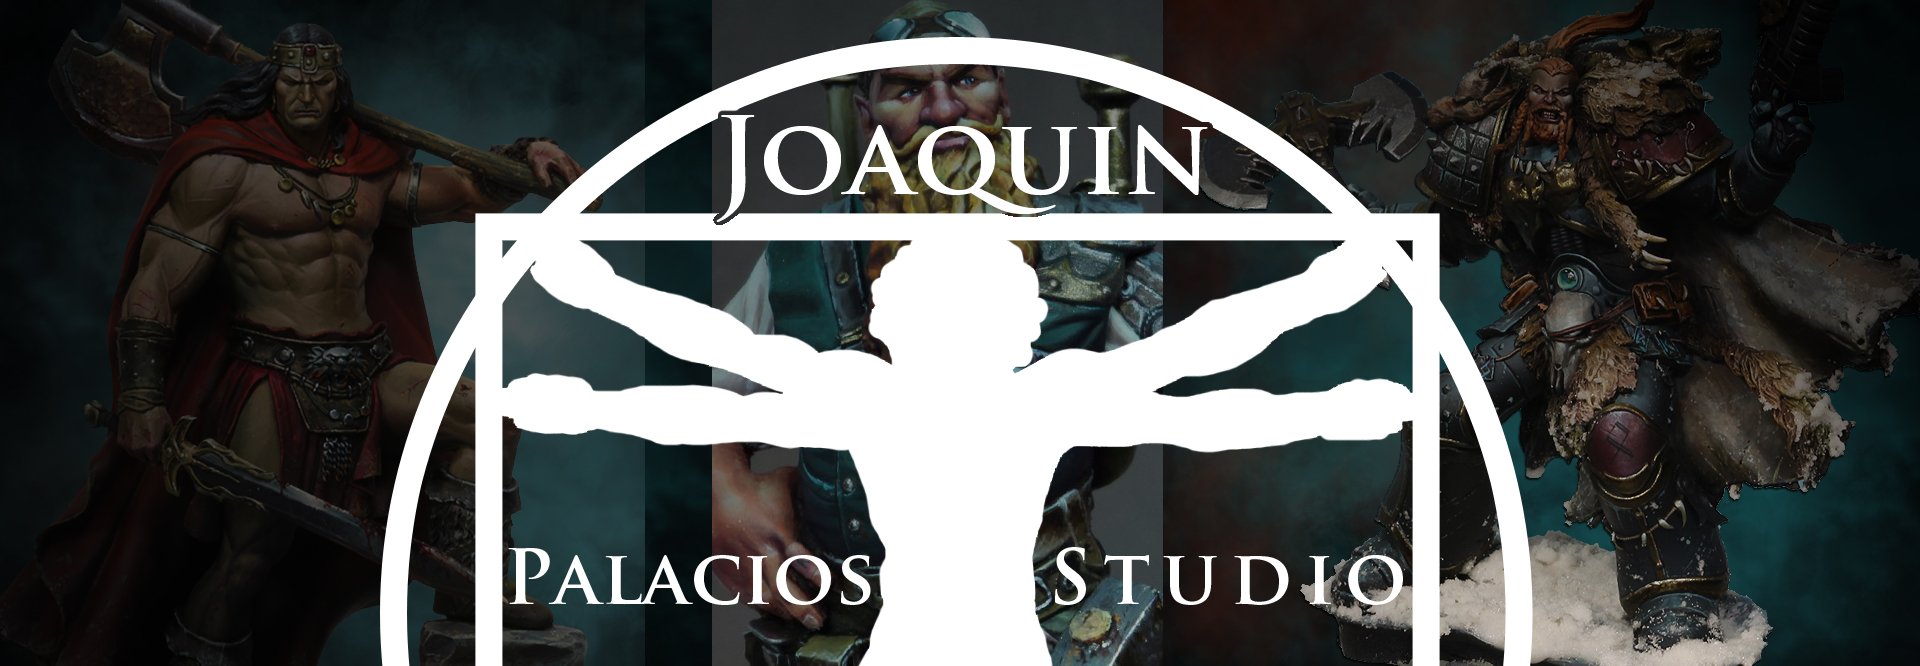 New brand in the store, Joaquin Palacios Studio, FREE SHIPPING WORLDWIDE